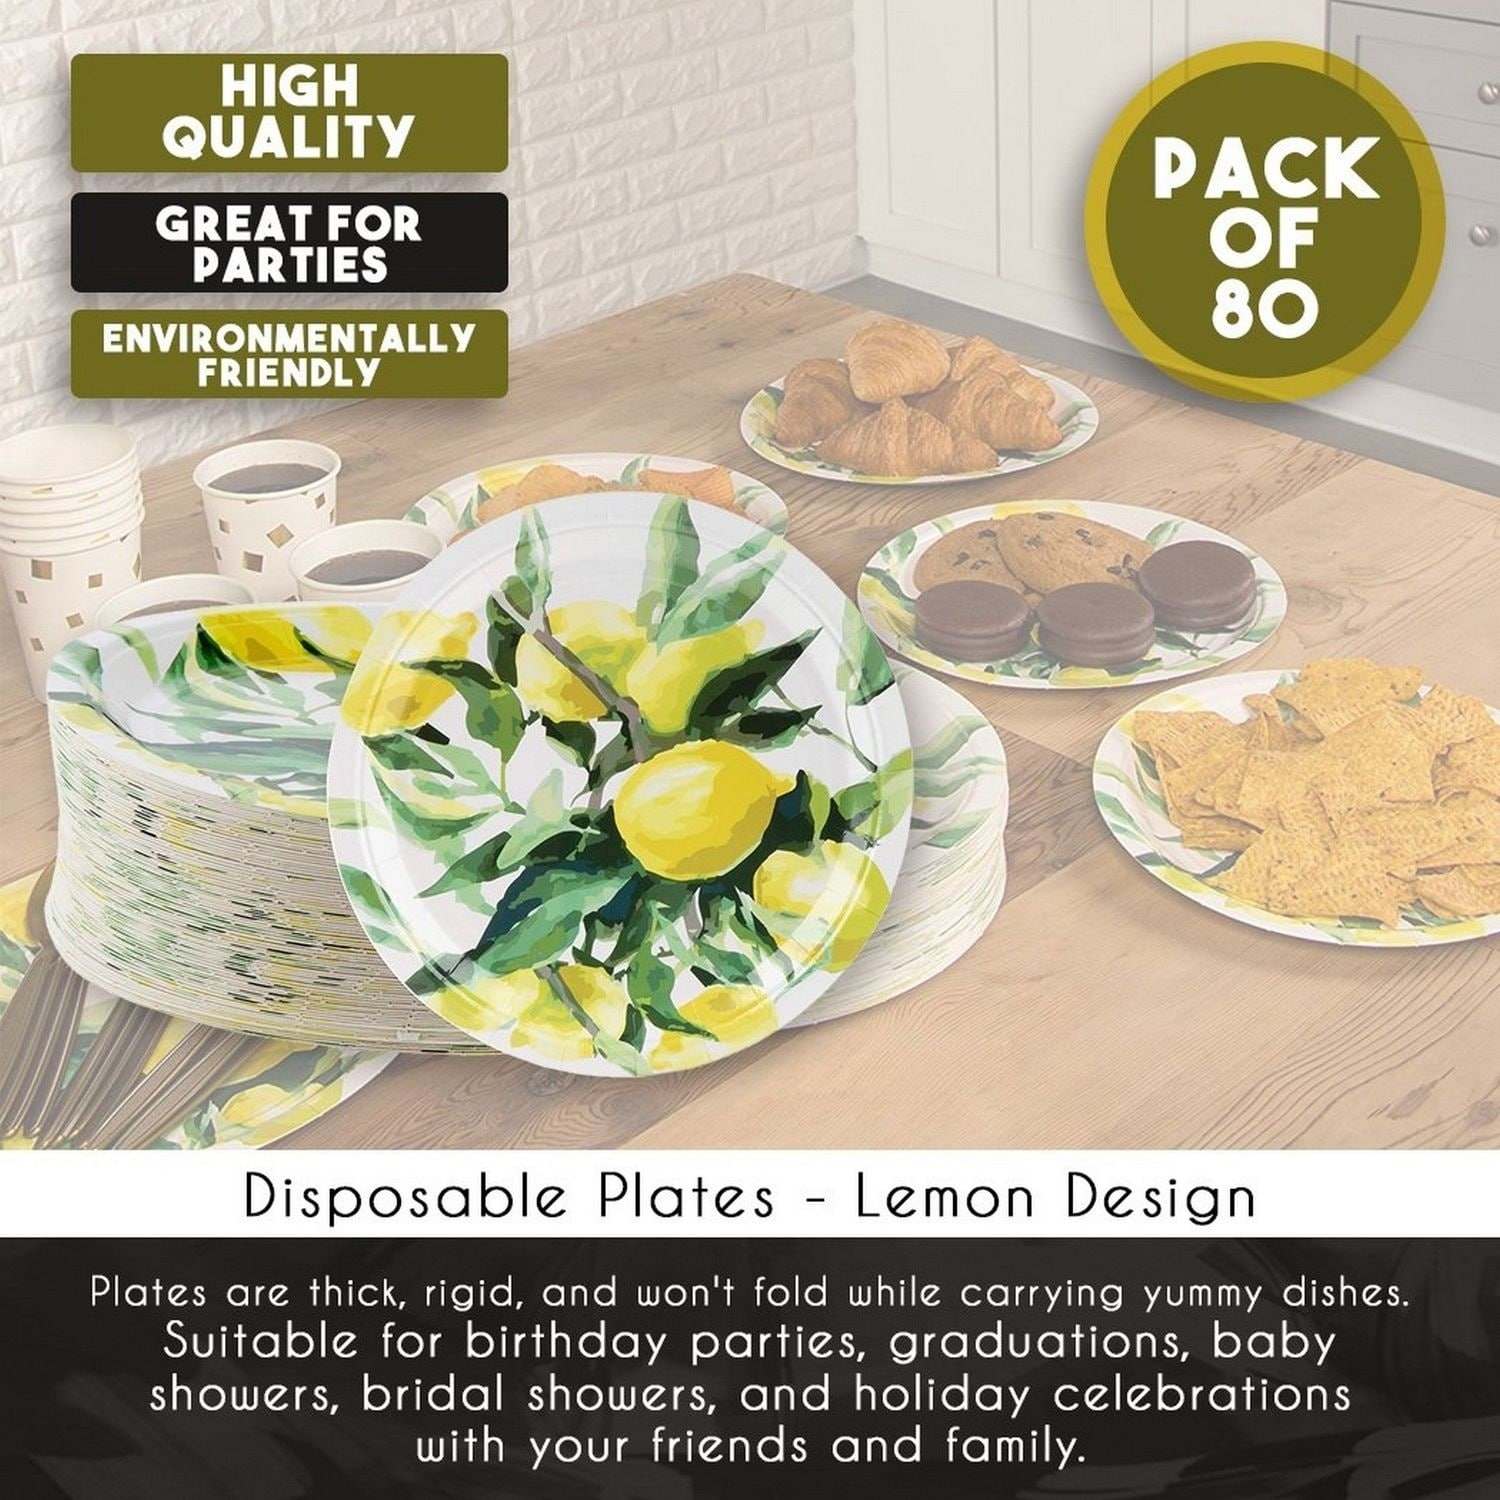 https://ak1.ostkcdn.com/images/products/29744743/80-Pack-Disposable-Paper-Plates-Lemon-Party-Supplies-For-Dinner-Lunch-9-x-9-b4934123-ce49-47e9-8495-57e314eb4eab.jpg